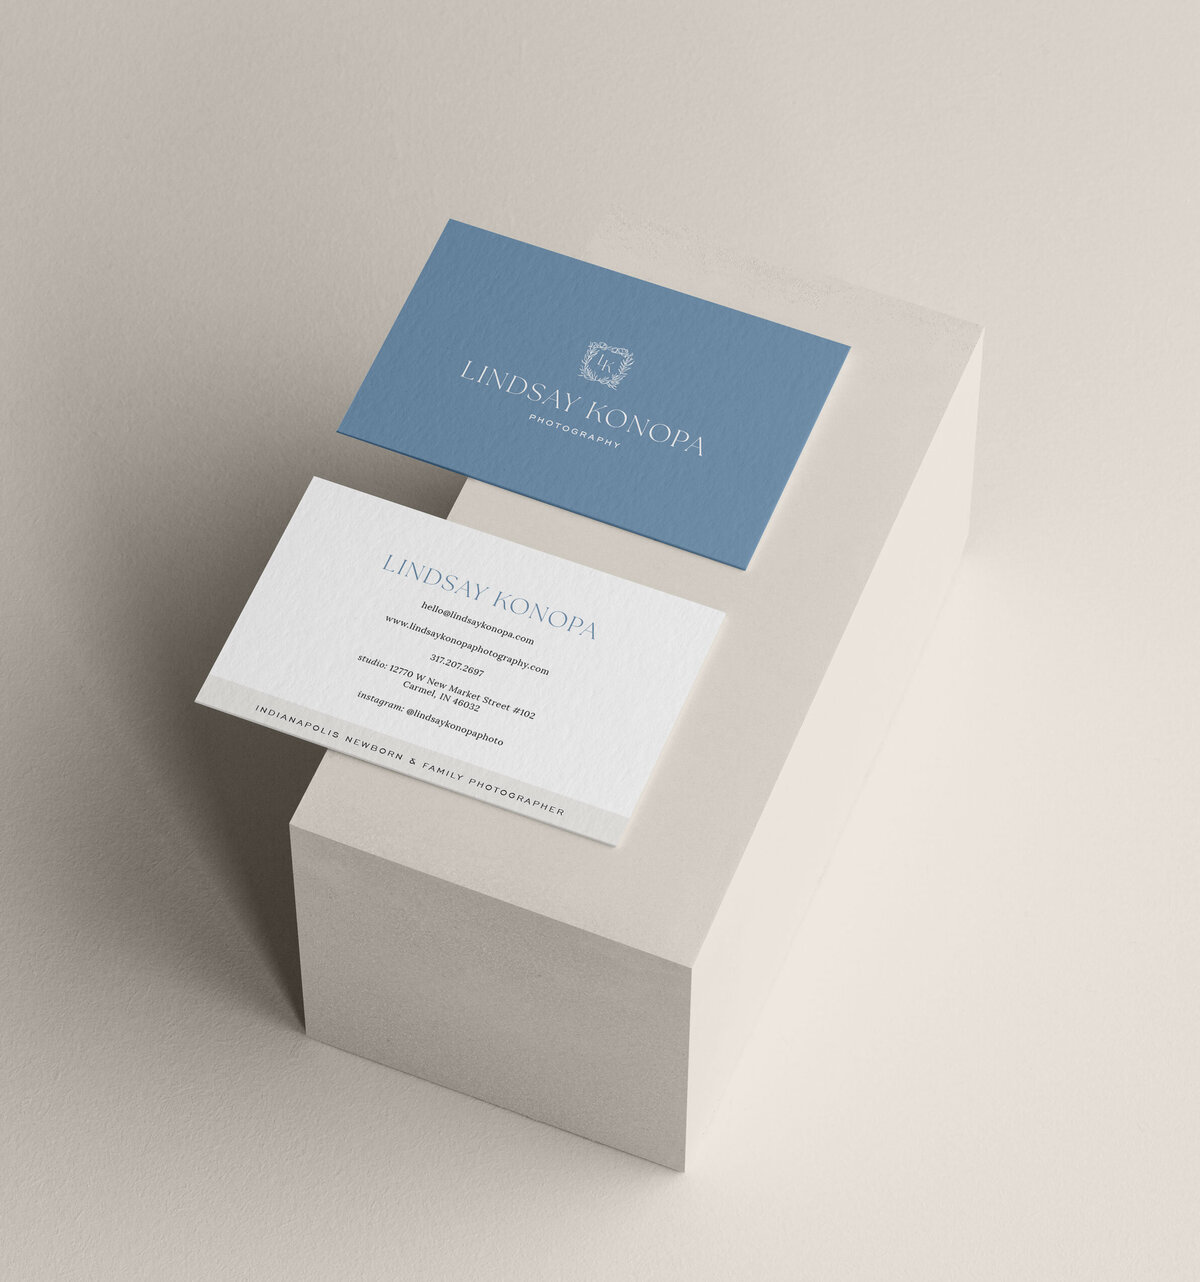 a mockup showing a stylish blue and white business card design